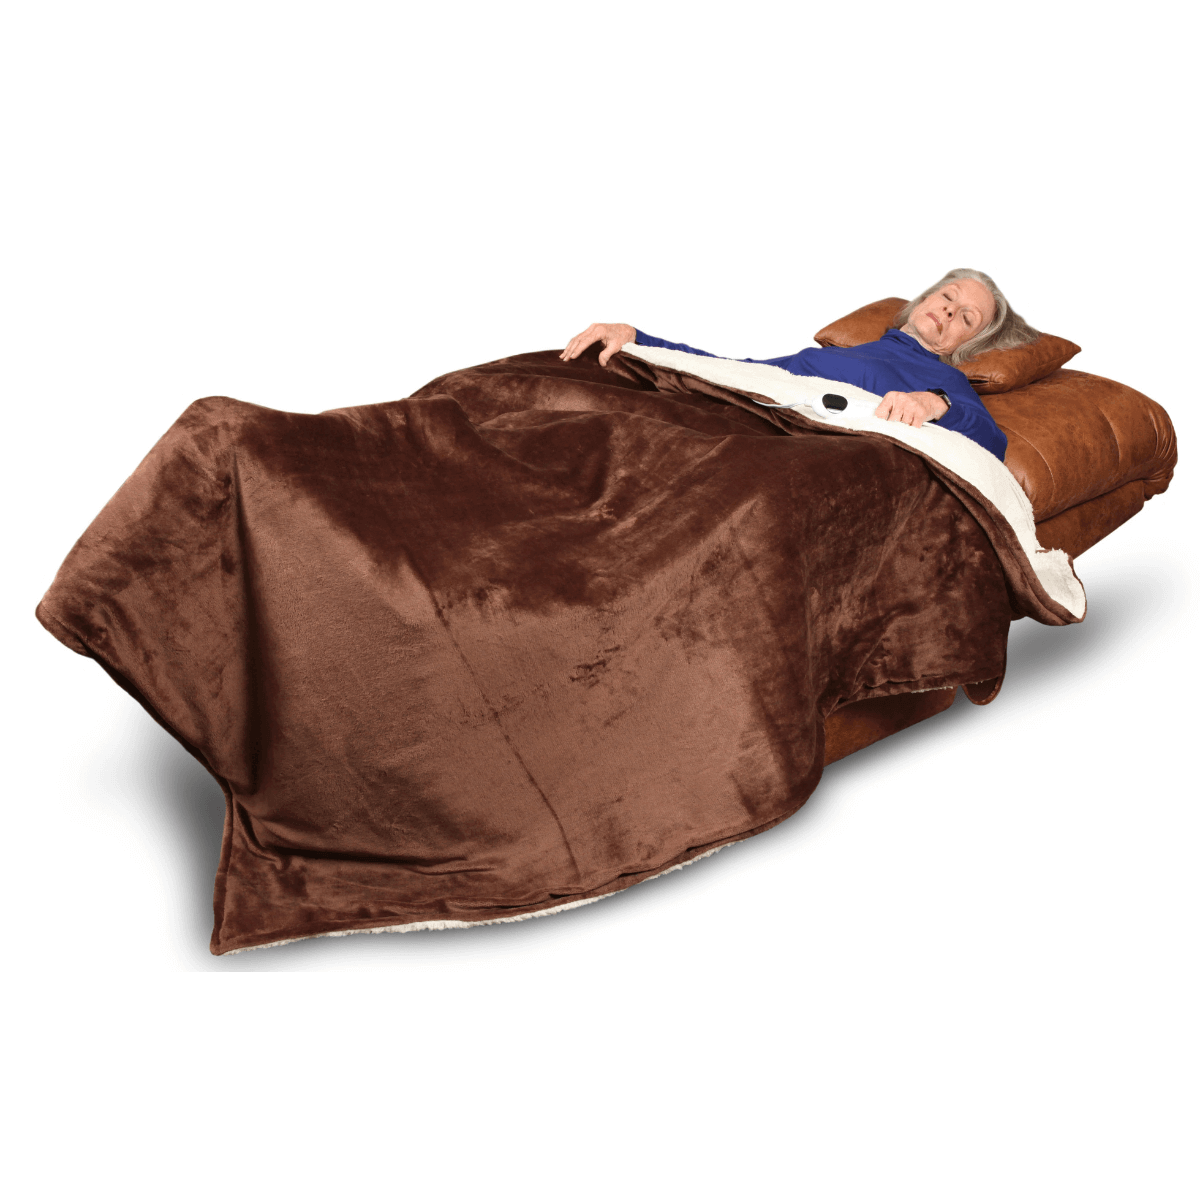 Older woman sleeping in a tan Duralux Perfect Sleep Chair, fully extended with brown blanket covering her